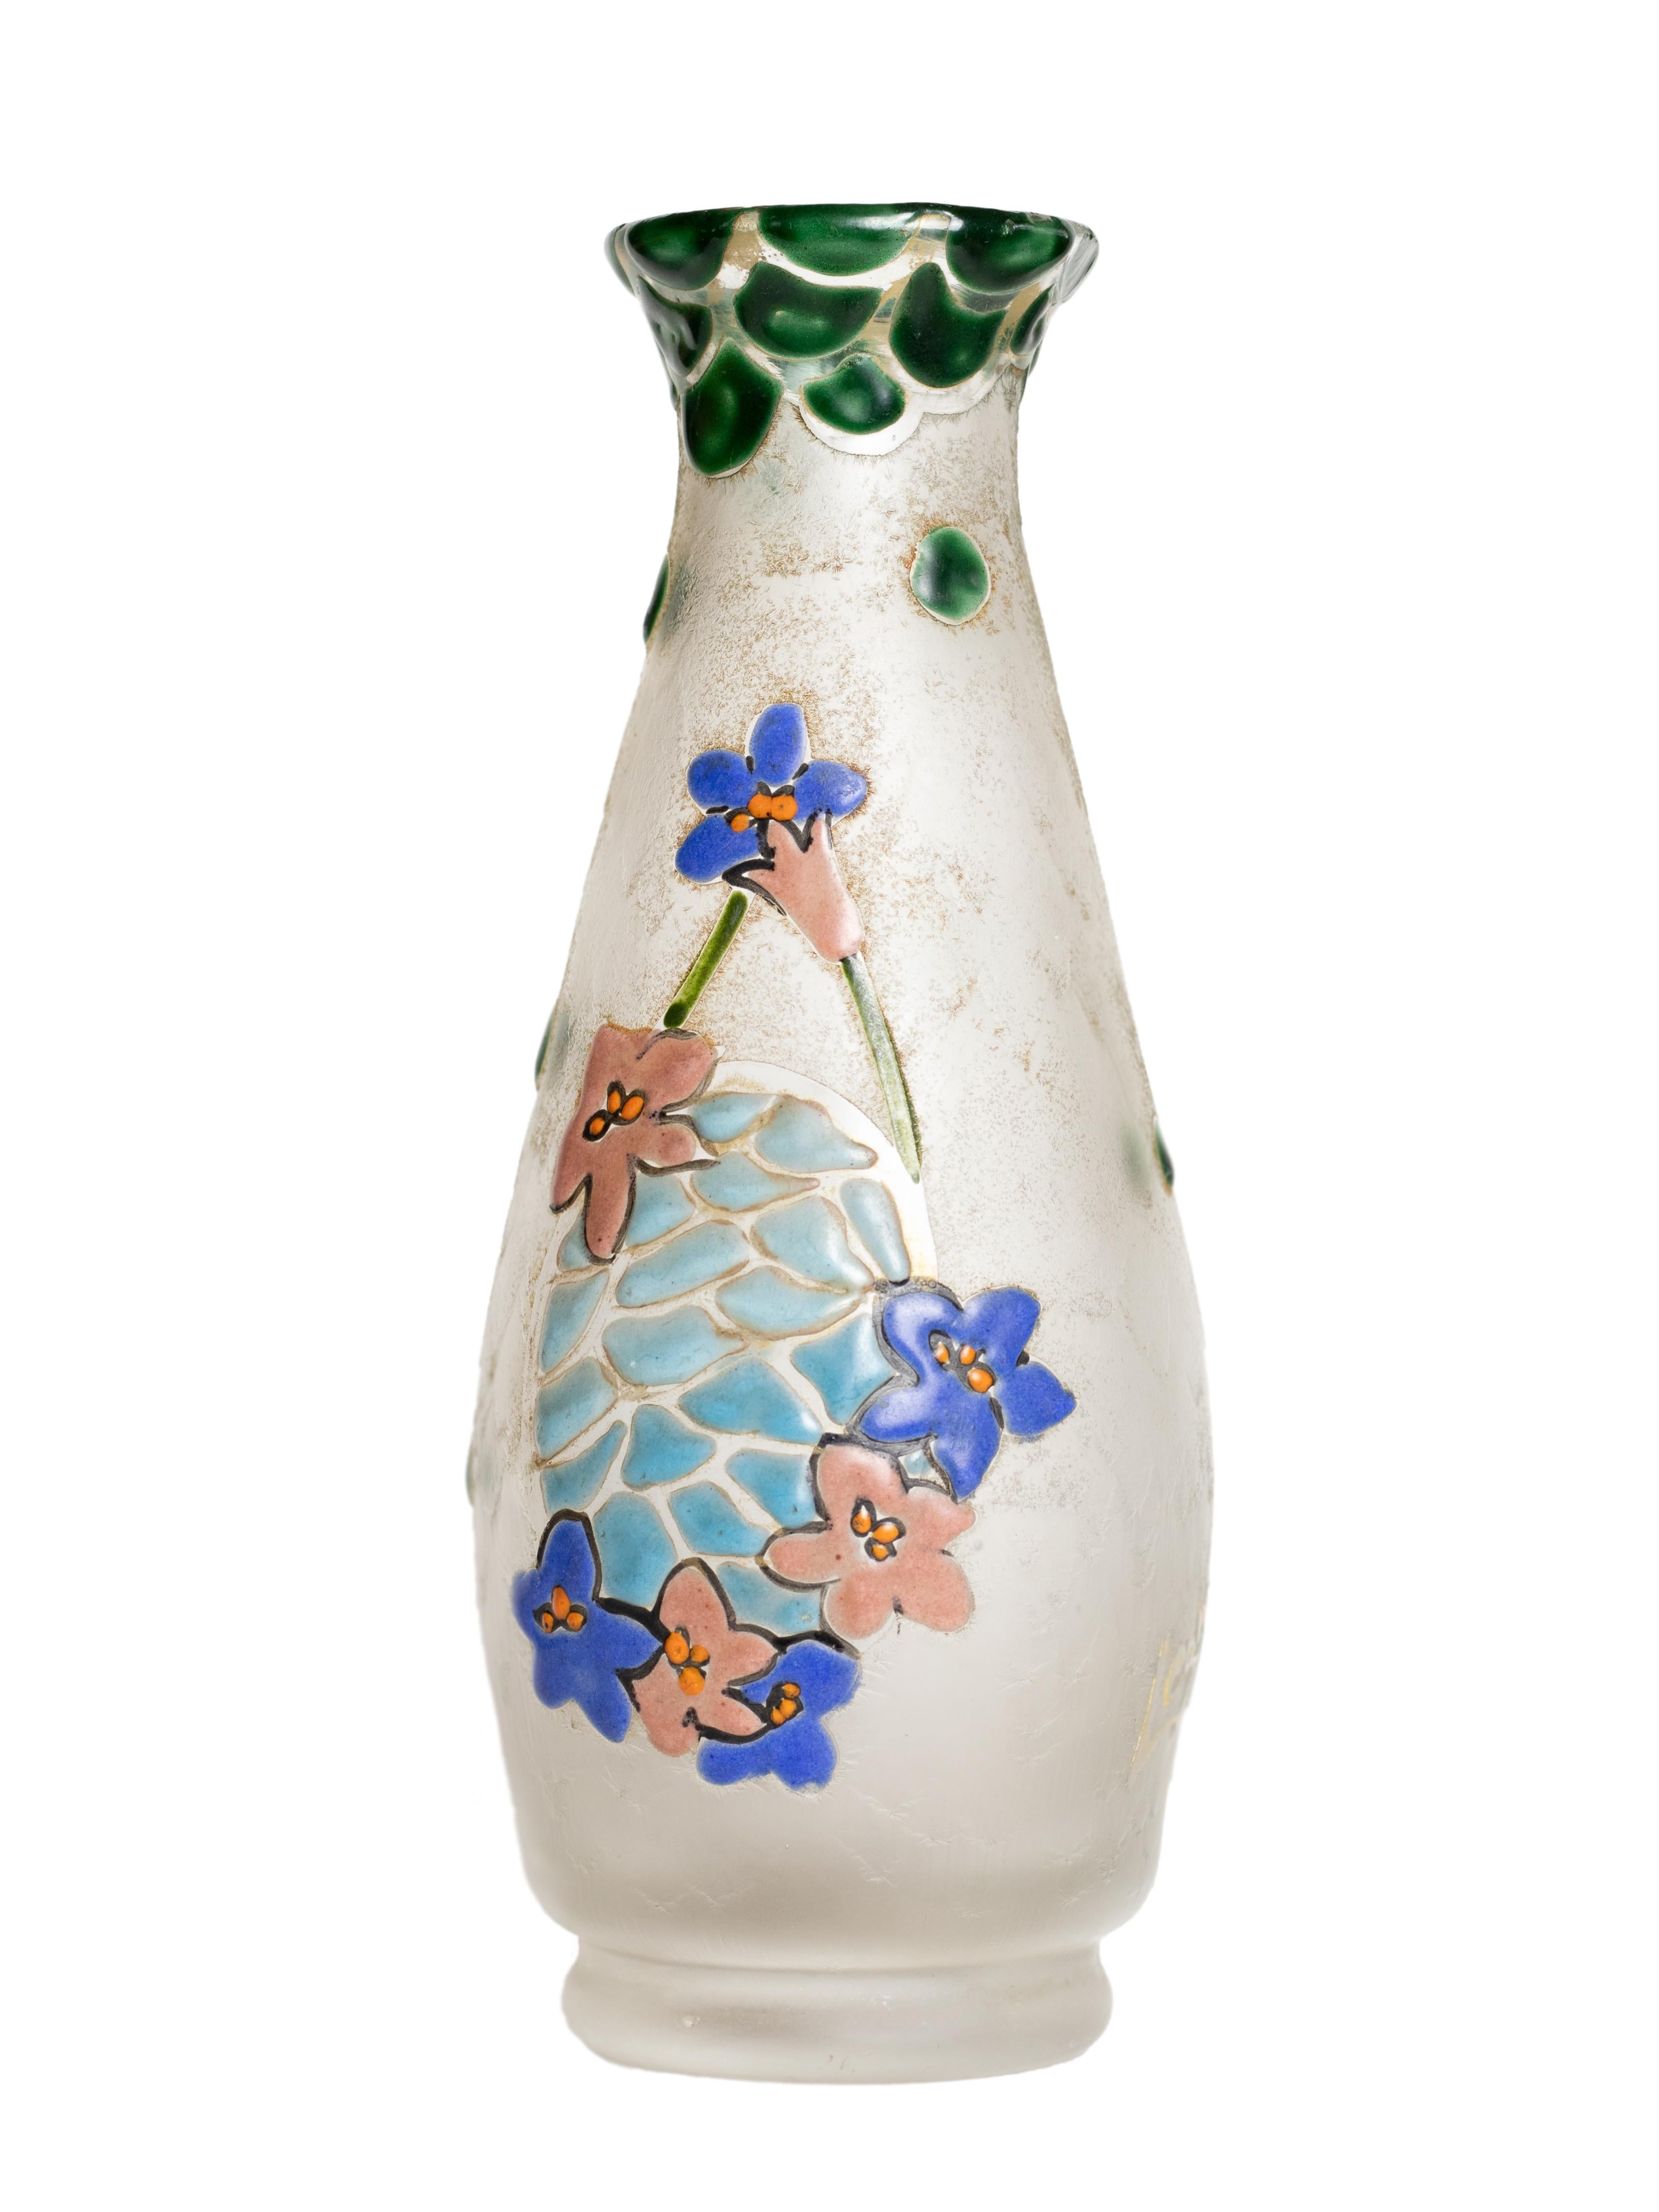 A glass vase in frosted white background with pink and blue flowers and green leaves etched in acid.
“Legras” signed.  
Legras Montjoye, France
